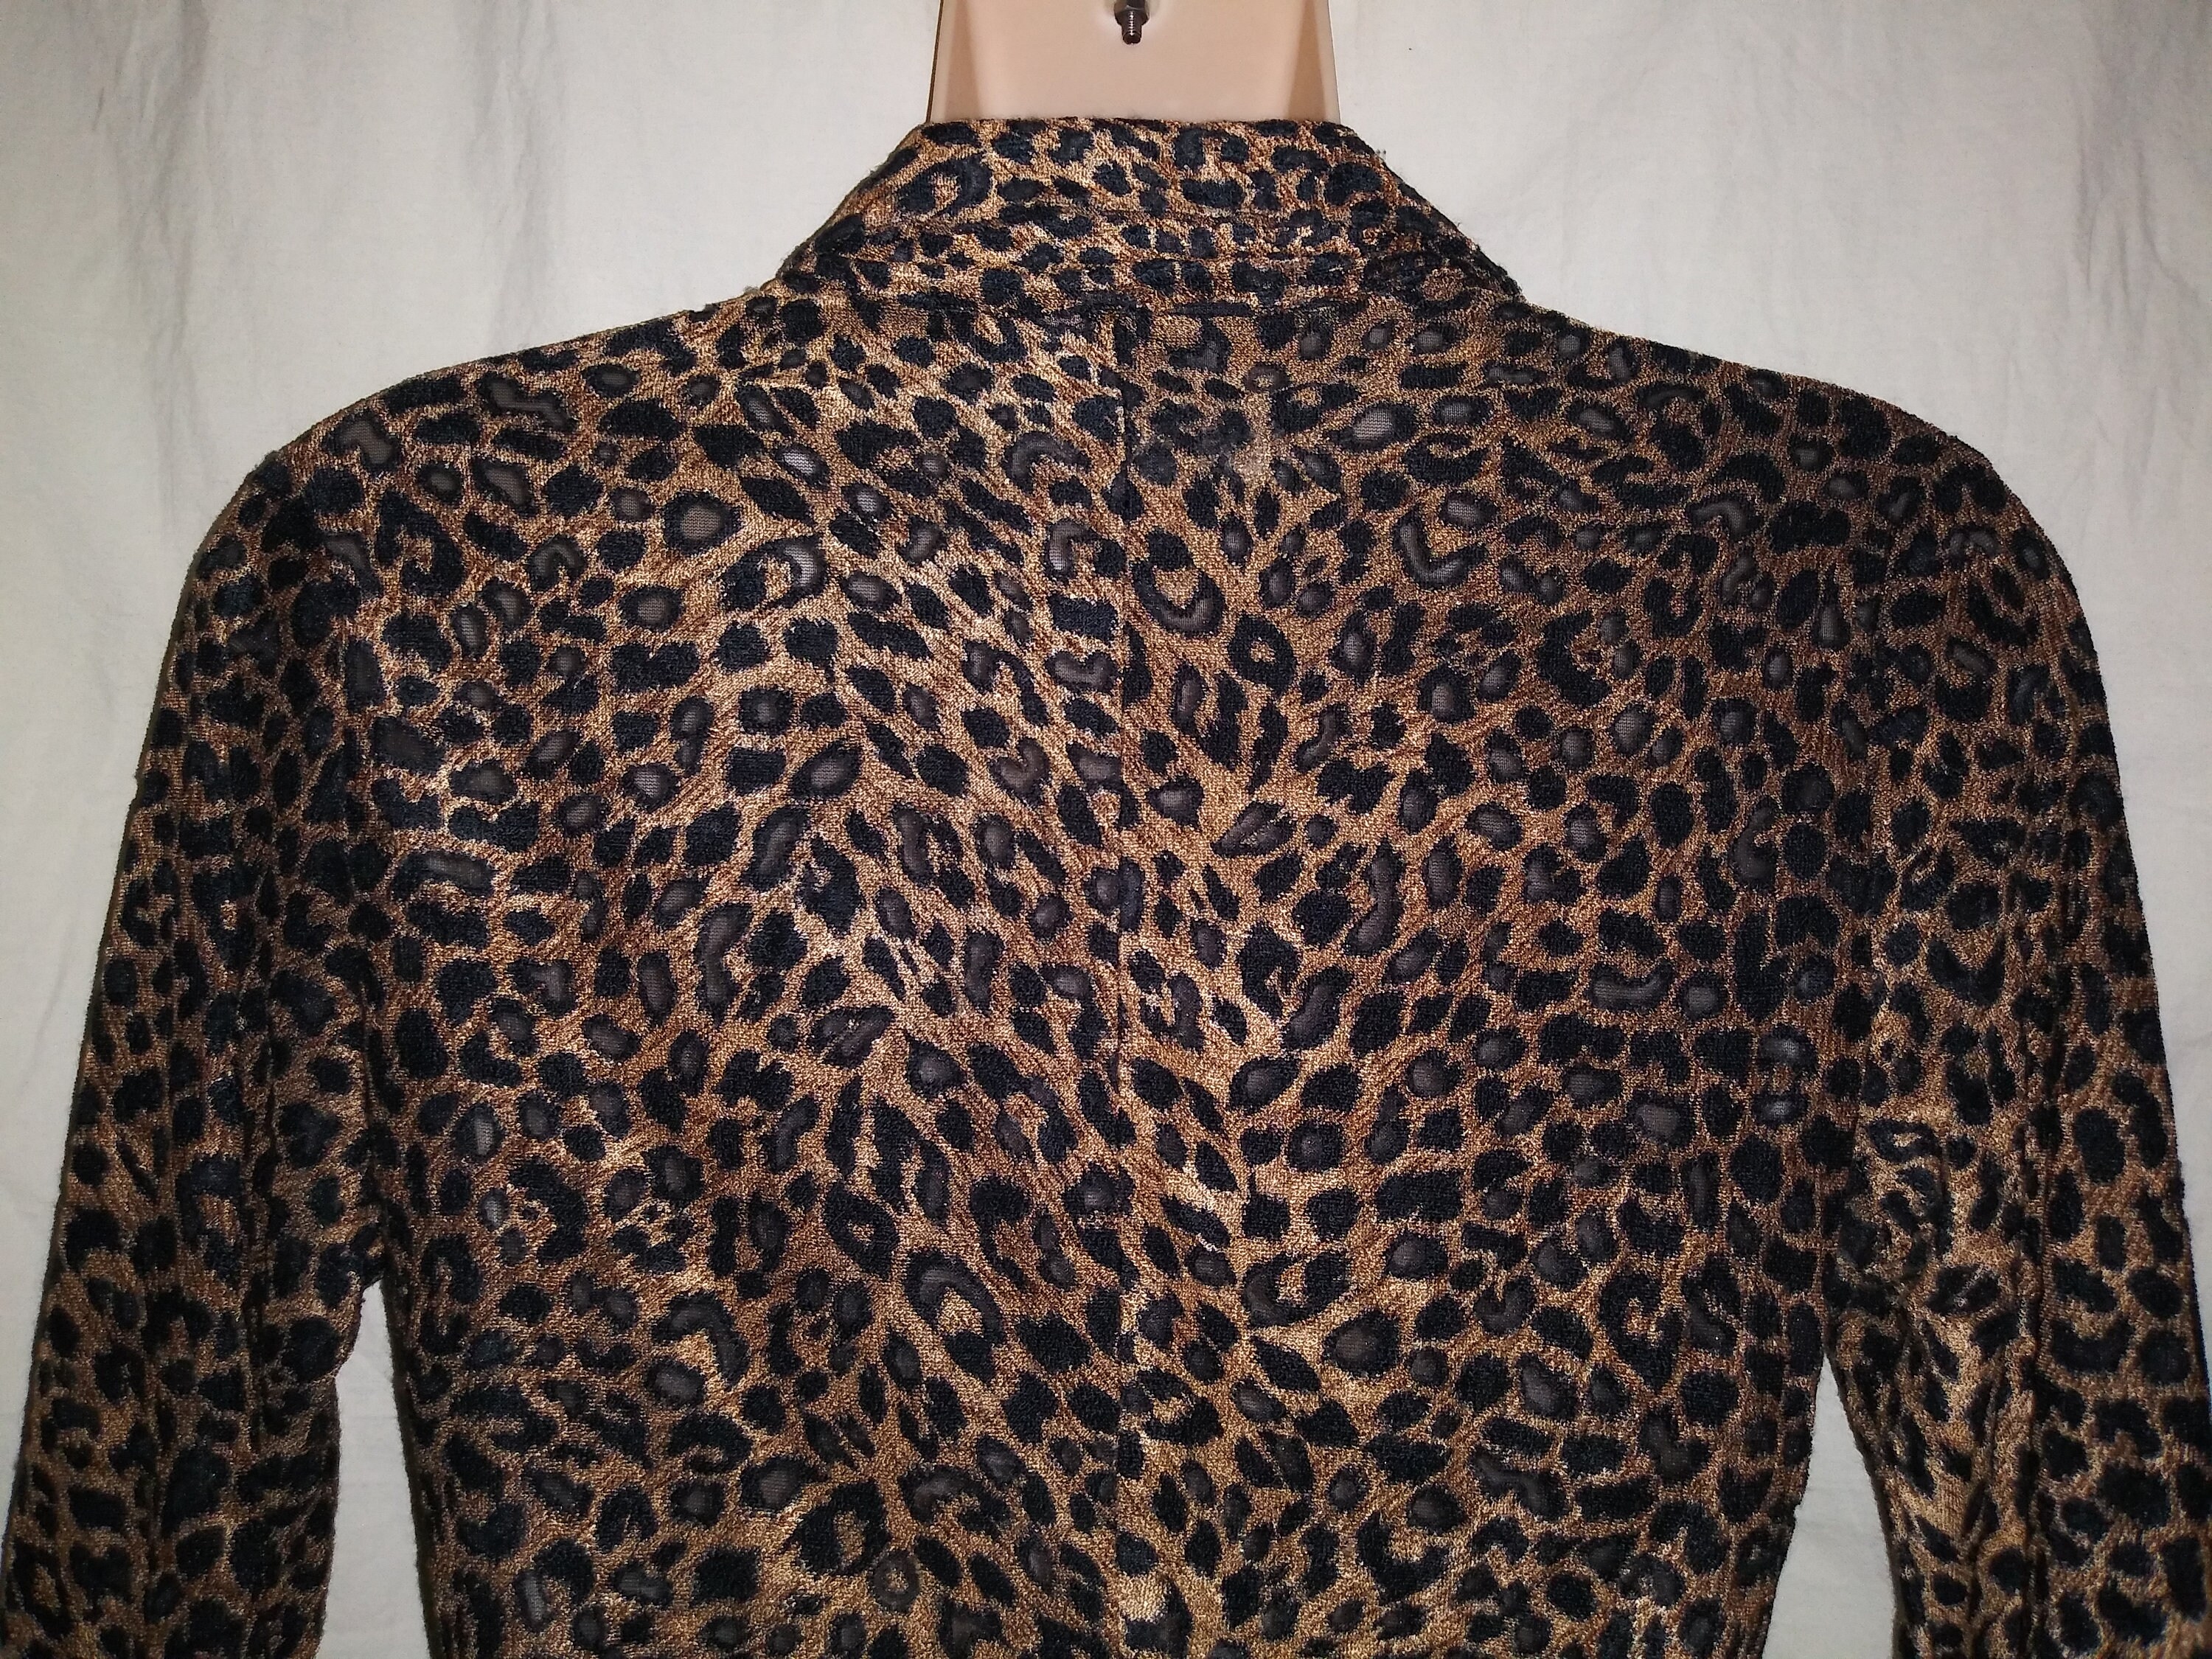 Vintage 90's S Leopard Cheetah Animal Print Burnout Fitted | Etsy